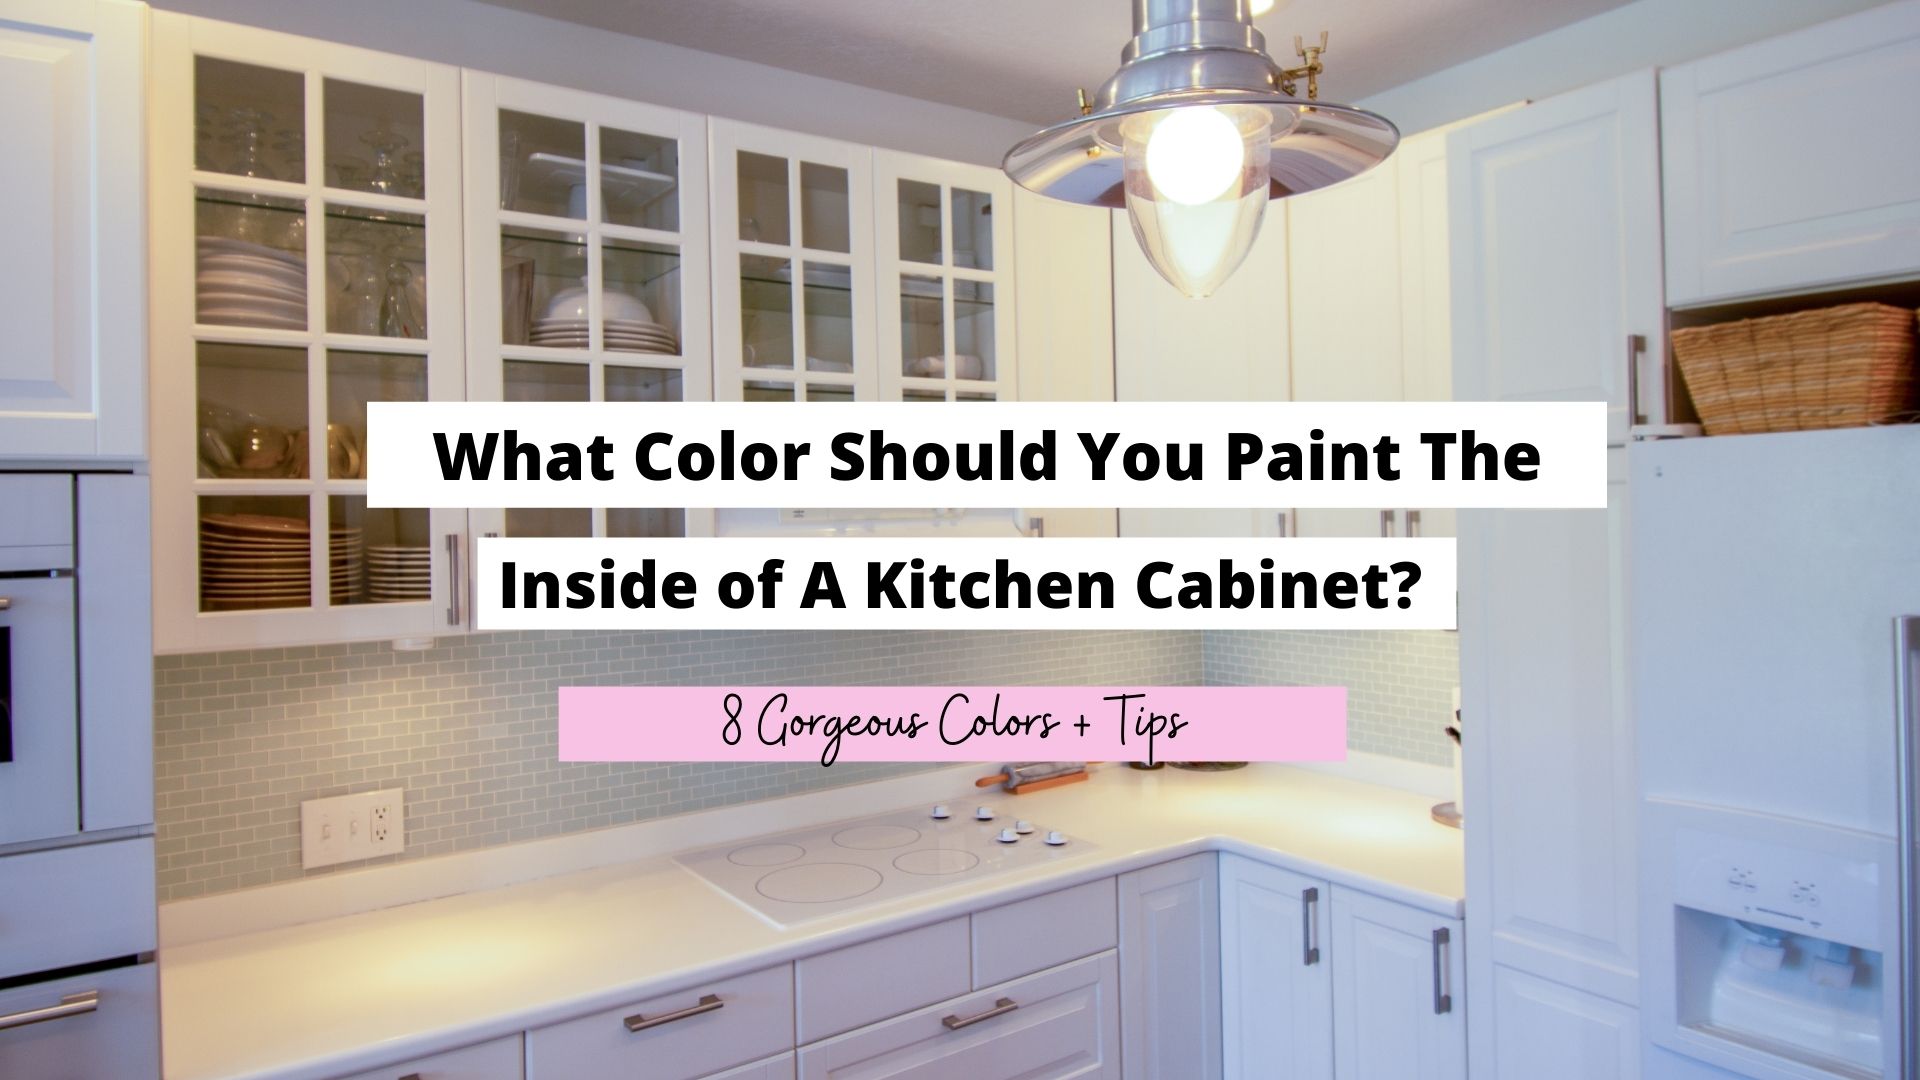 What Color Should You Paint The Inside Of Kitchen Cabinets